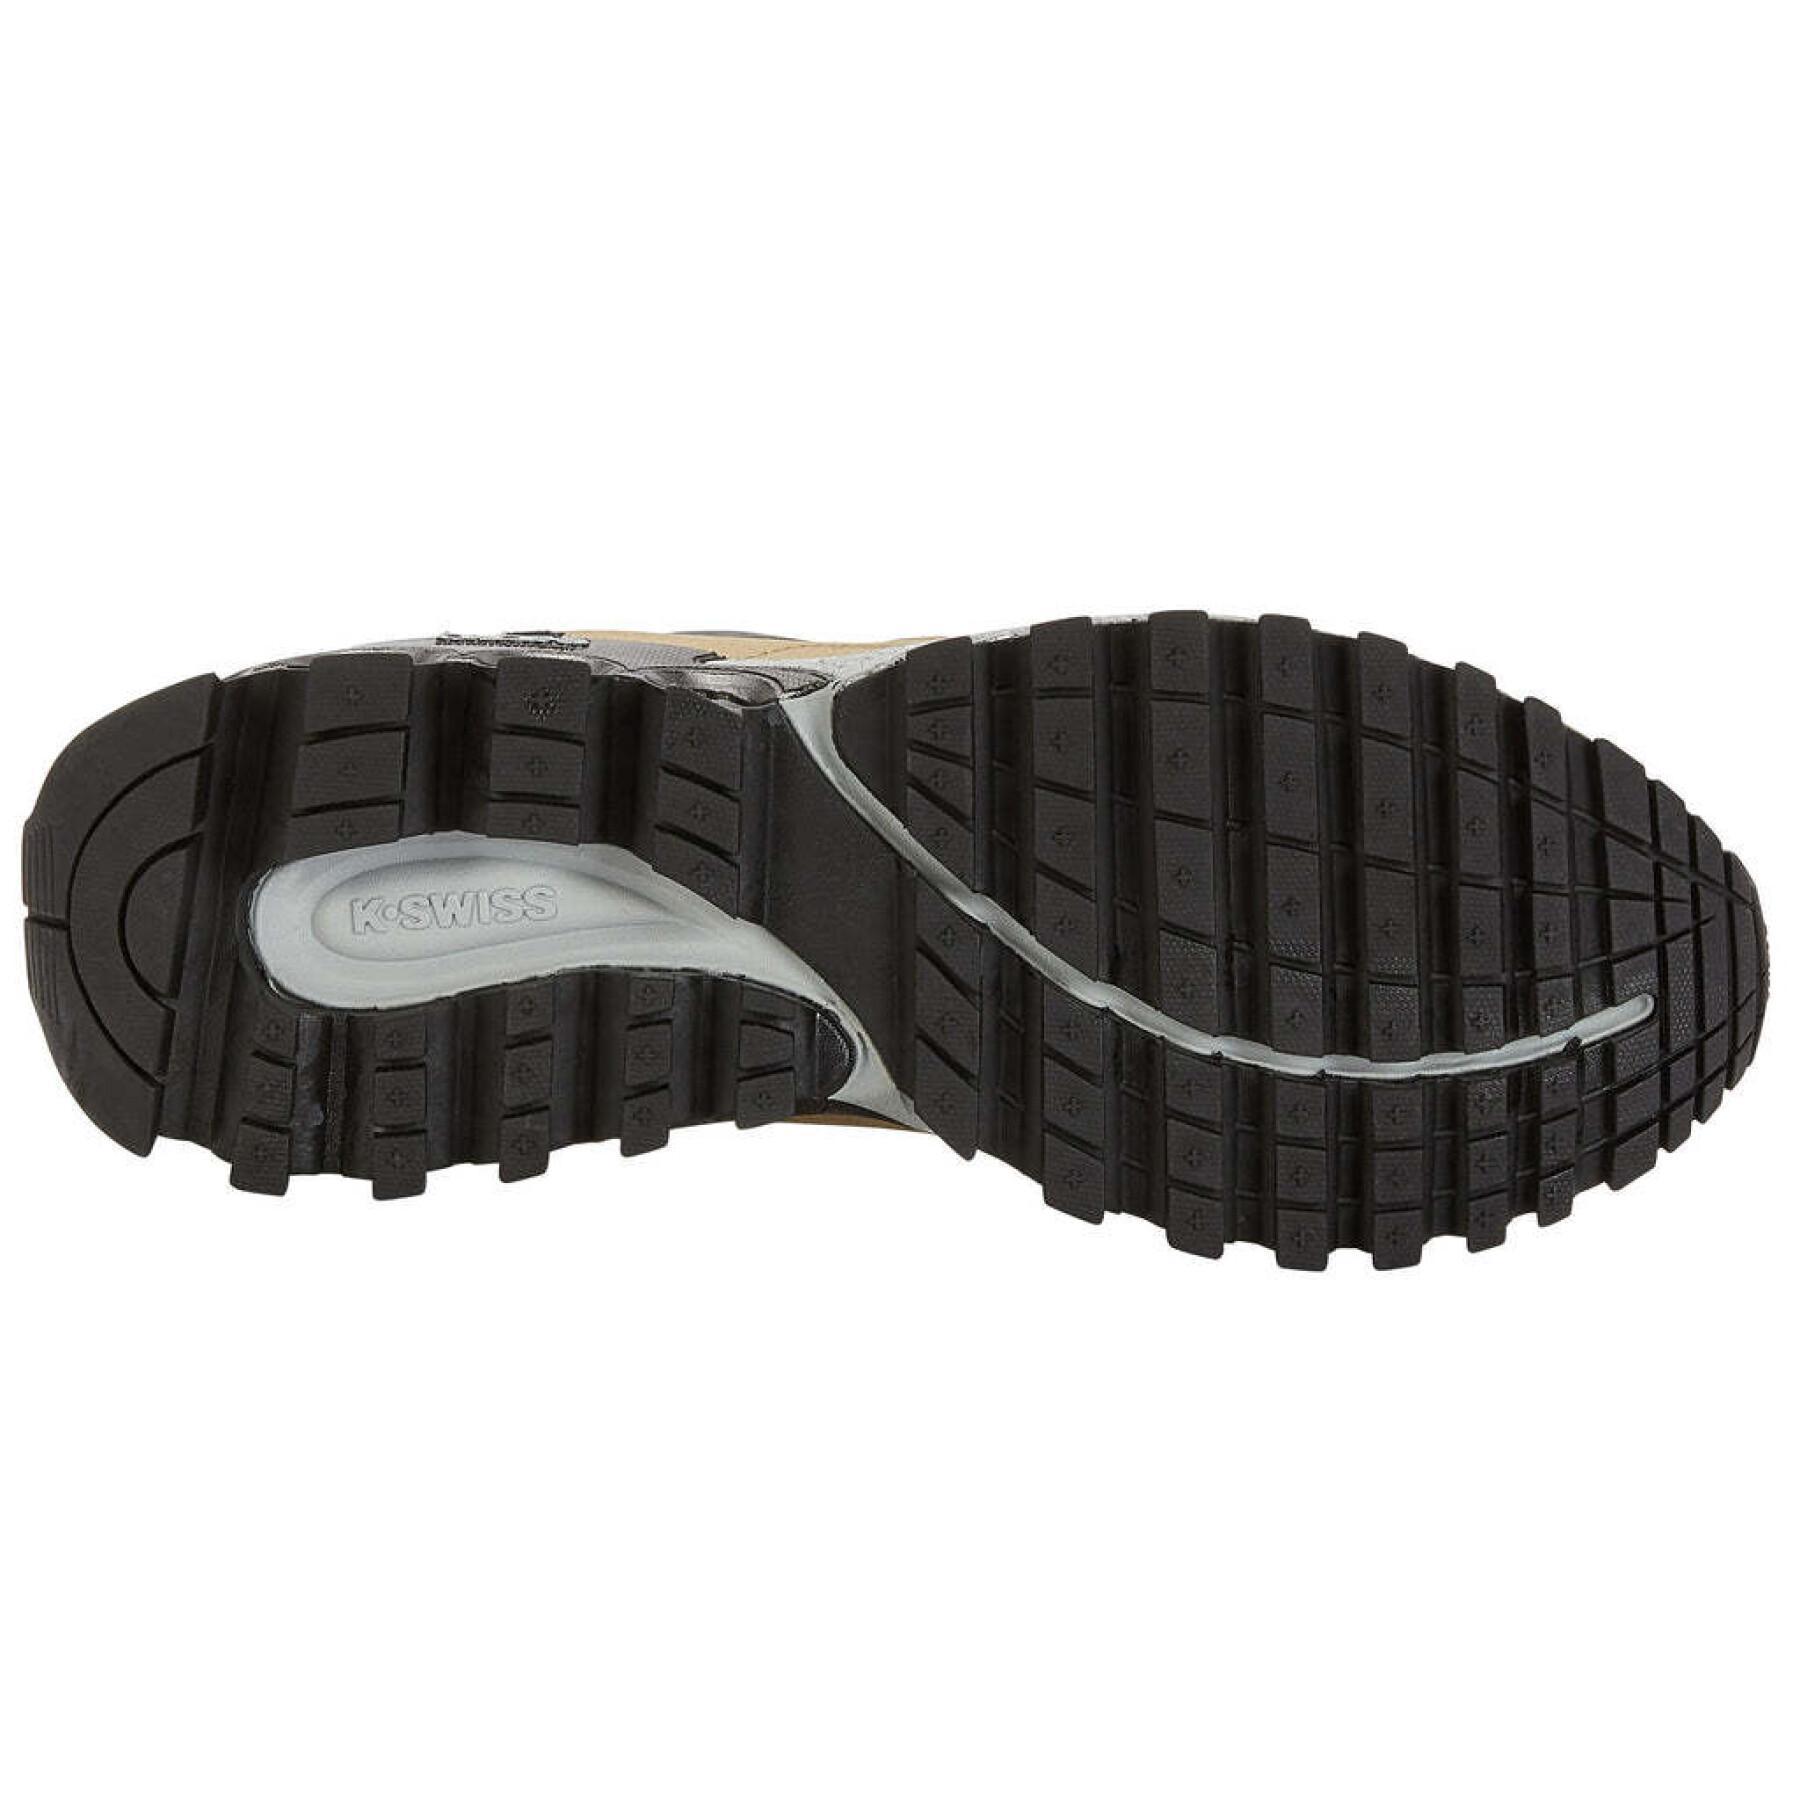 Formadores K-Swiss Tubes Sport